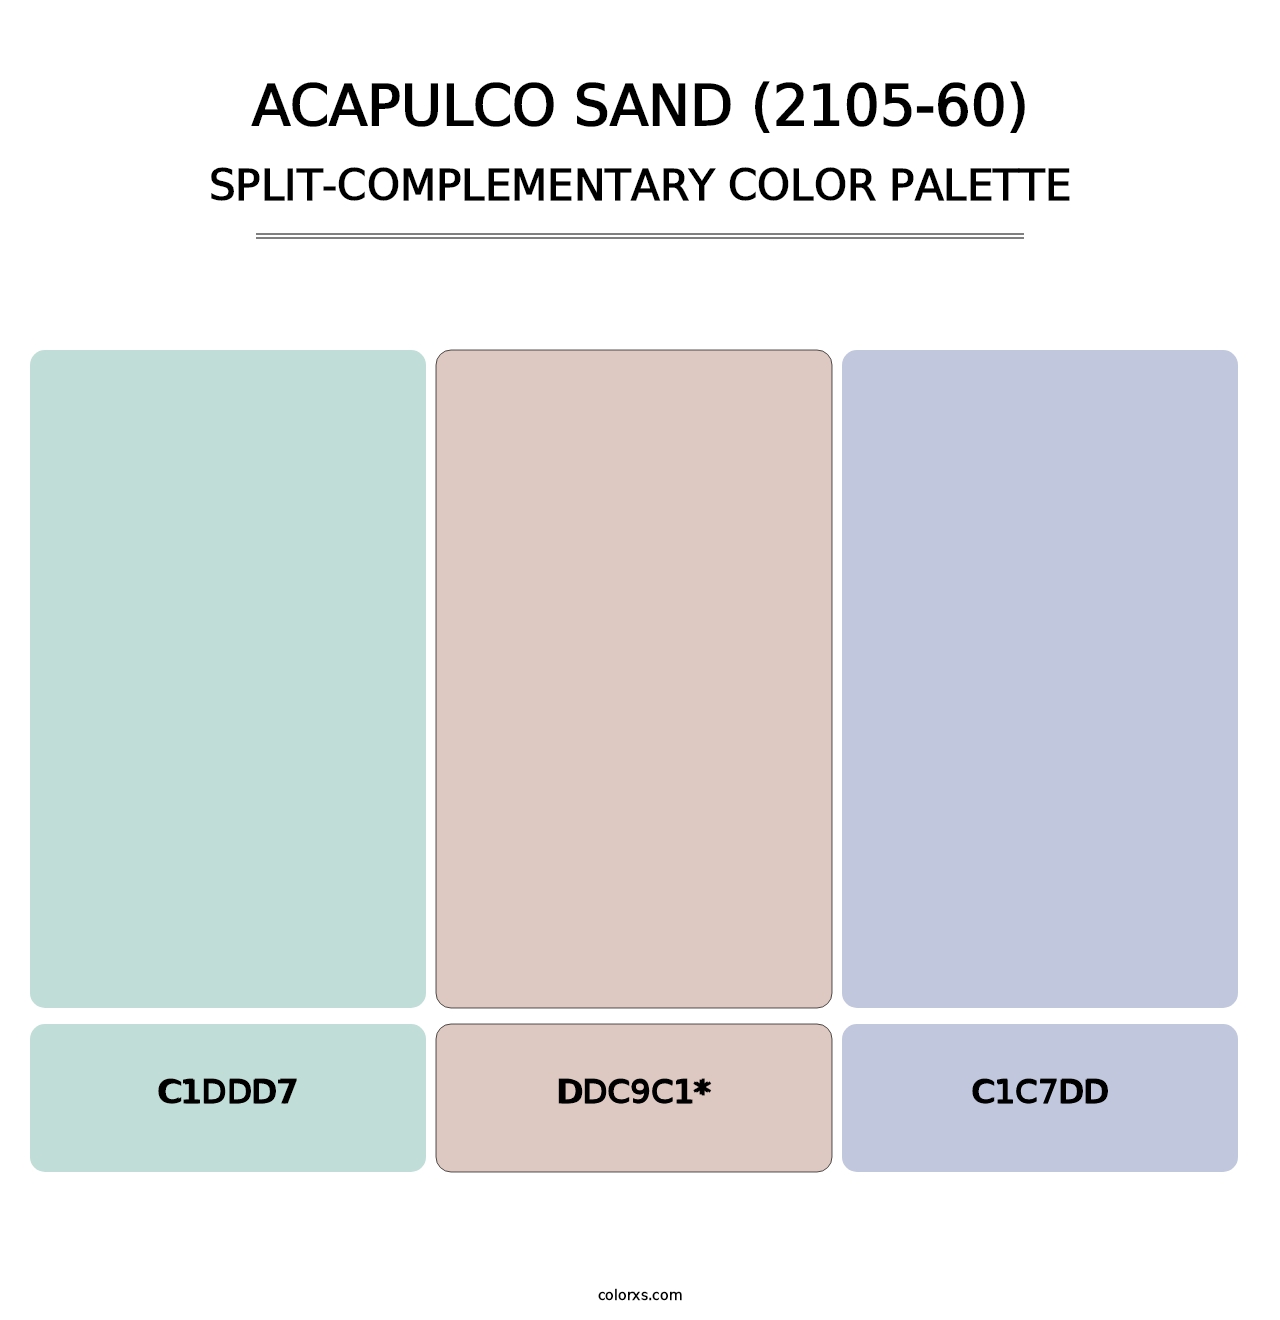 Acapulco Sand (2105-60) - Split-Complementary Color Palette